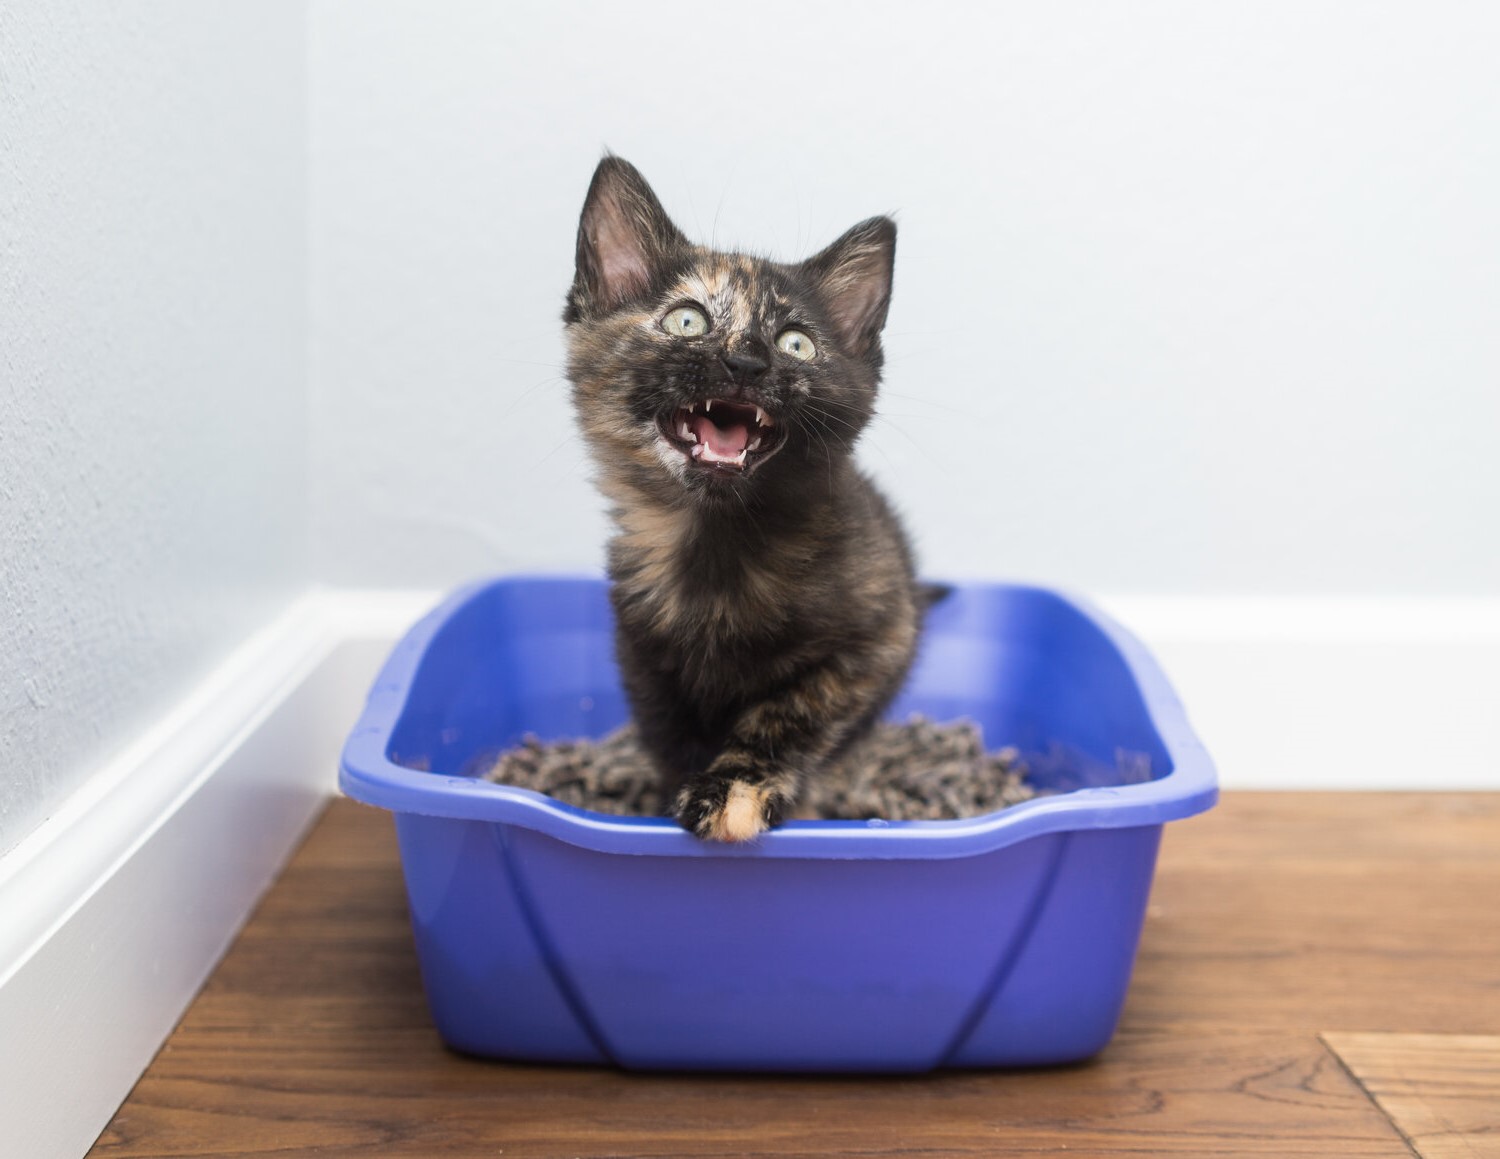 How To Get A Kitten To Poop In The Litter Box